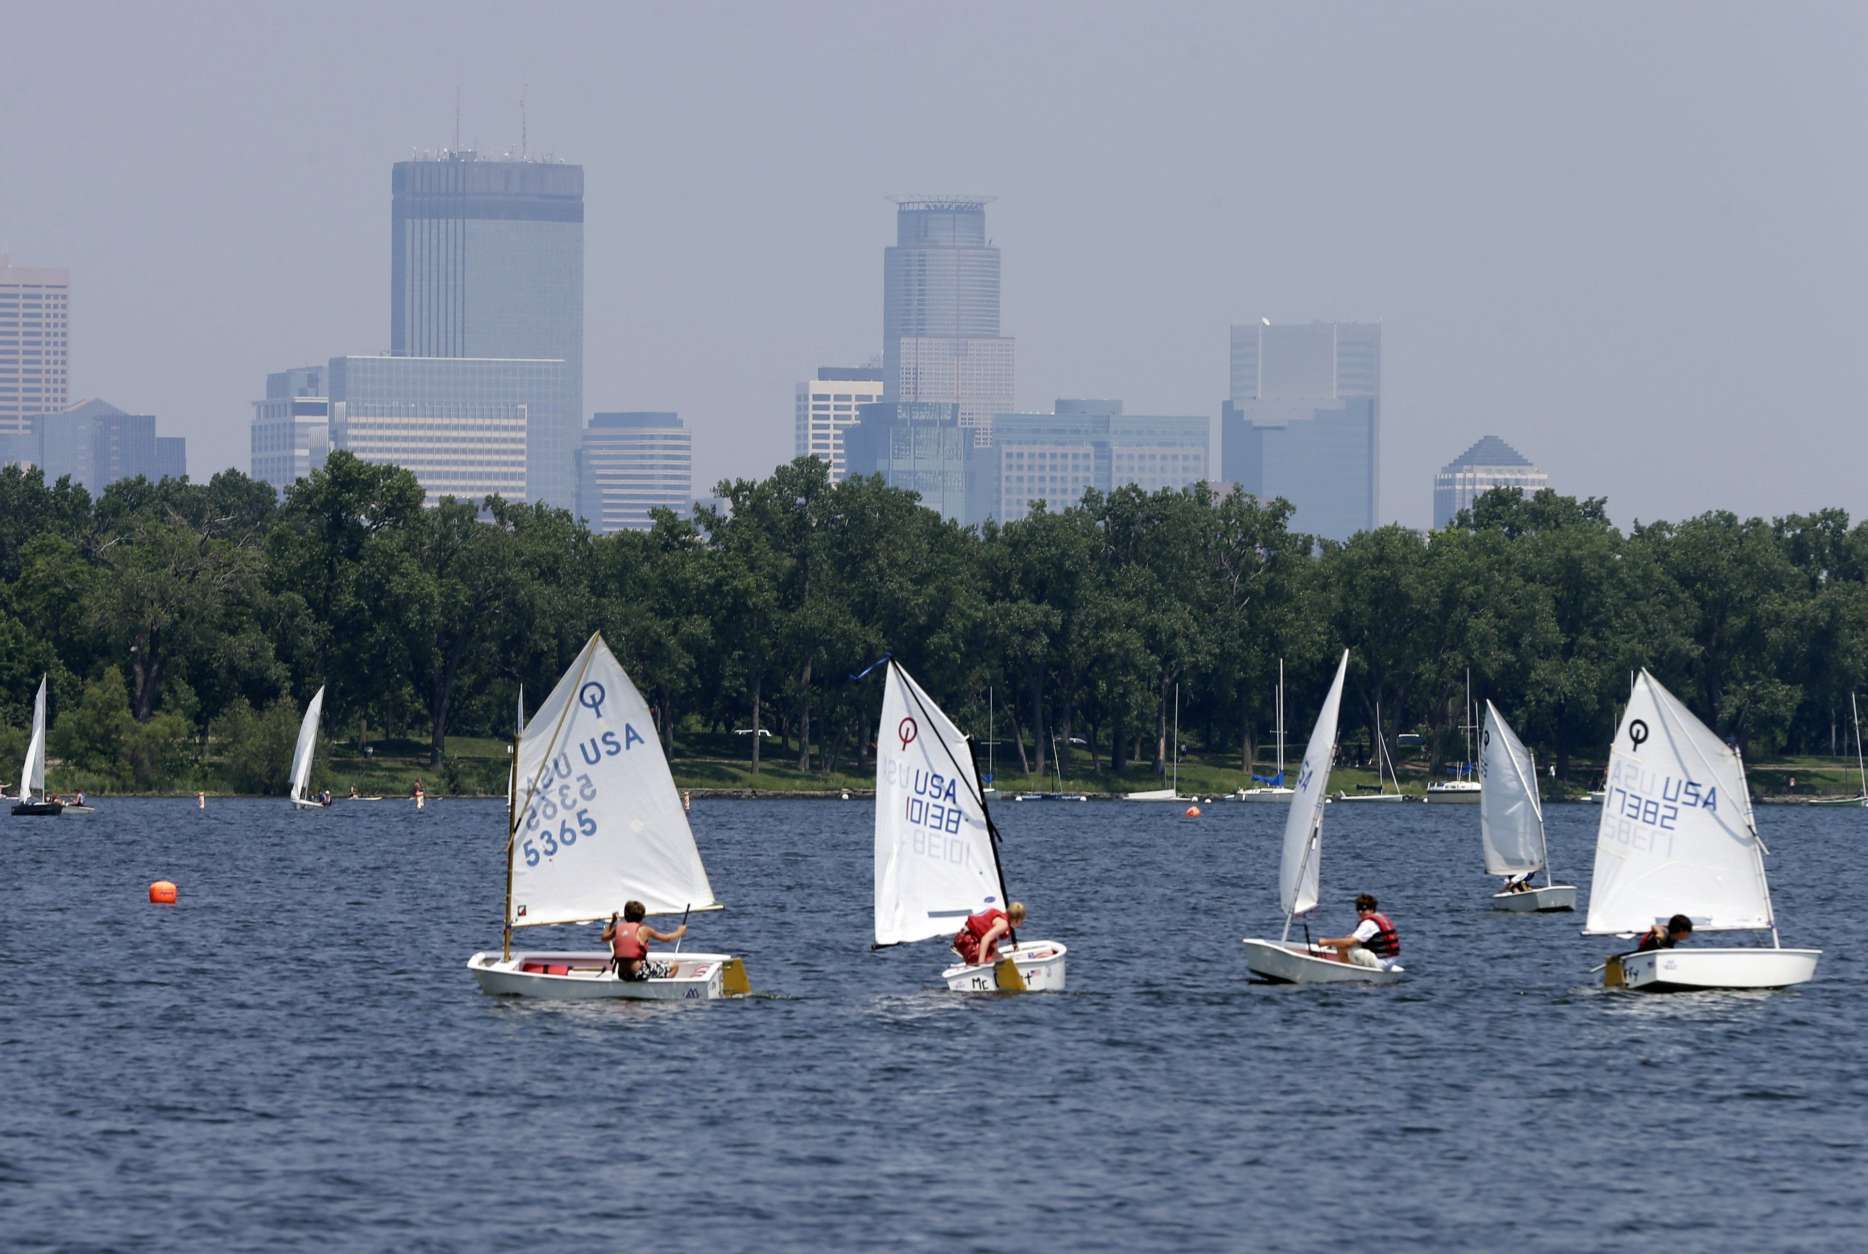 Sailing enthusiasts navigate the waters of Lake Calhoun as the Minneapolis skyline rises, shrouded in hazy skies because of elevated levels of fine particle pollution, likely the result of smoke from Canadian forest fires,Thursday, July 11, 2013. Air pollution levels are expected to remain elevated through Friday evening, July 12.  (AP Photo/Jim Mone)